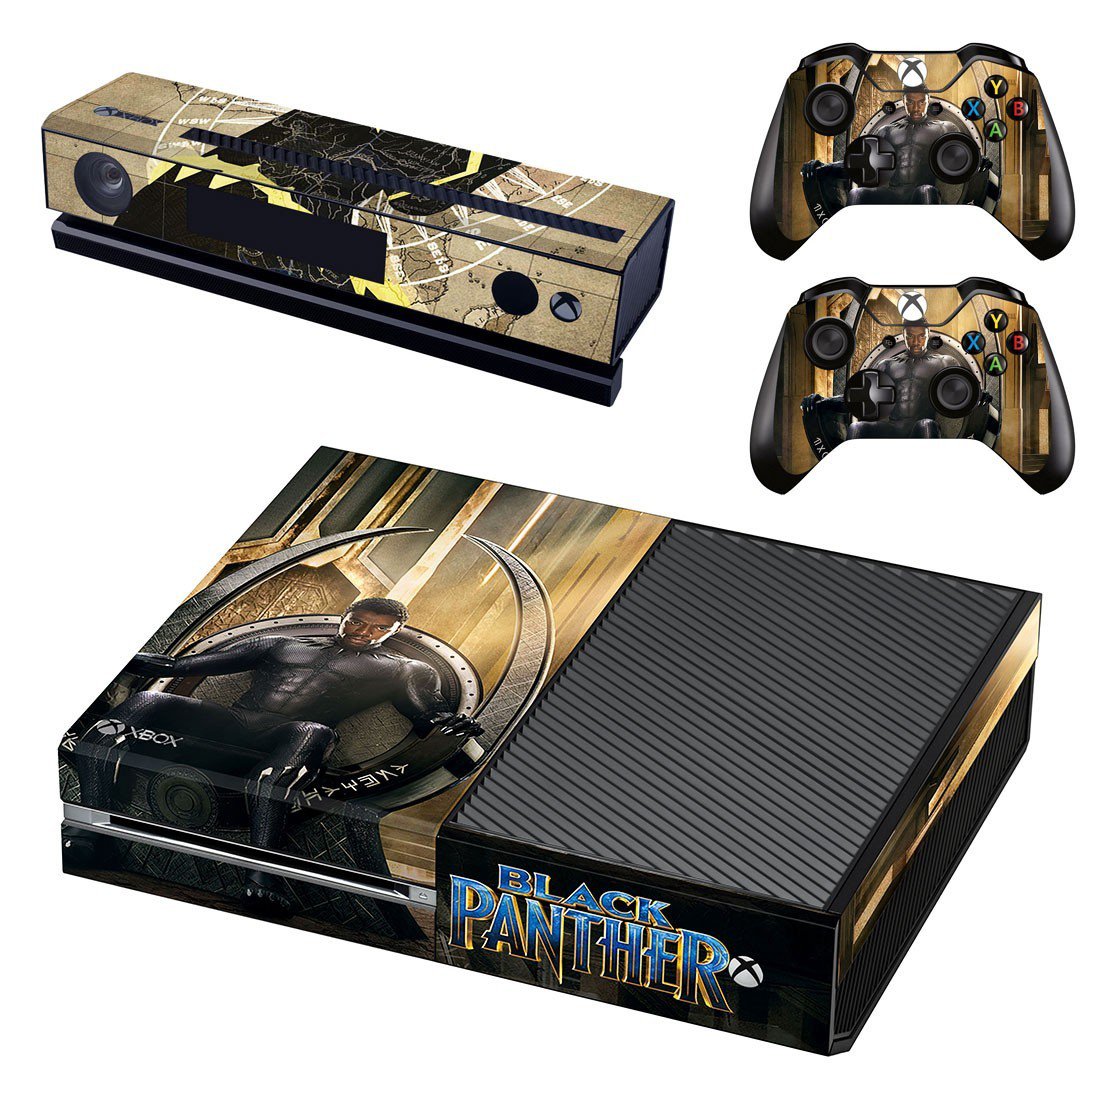 Xbox One And Controllers Skin Cover Black Panther